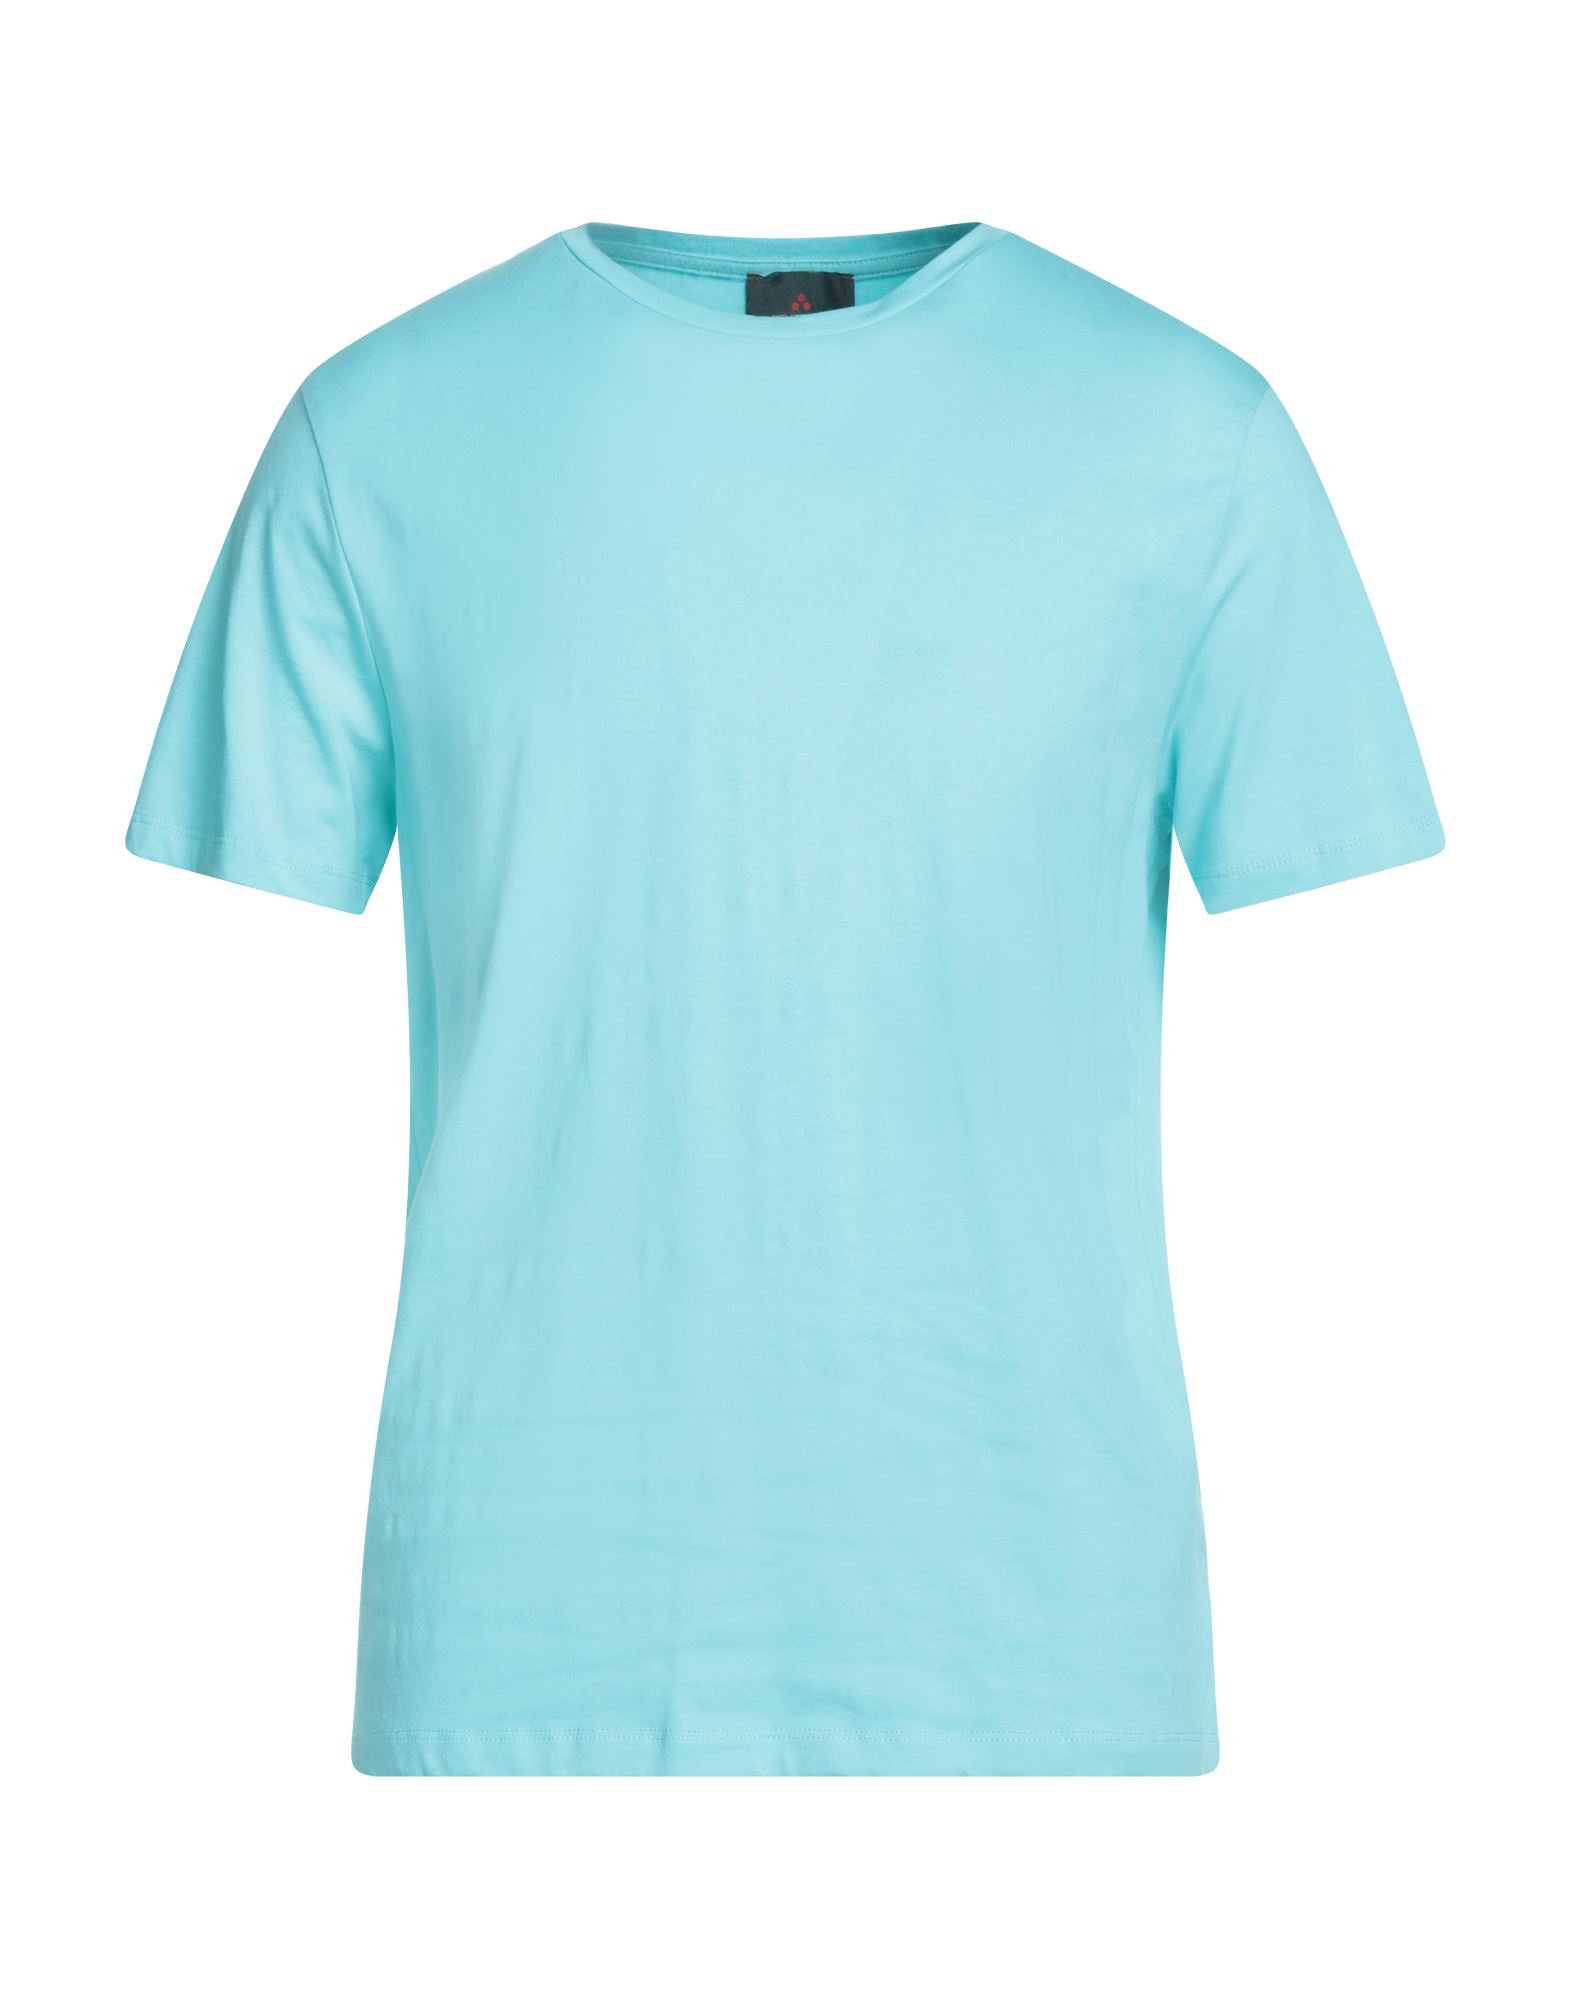 Peuterey T-shirts In Blue